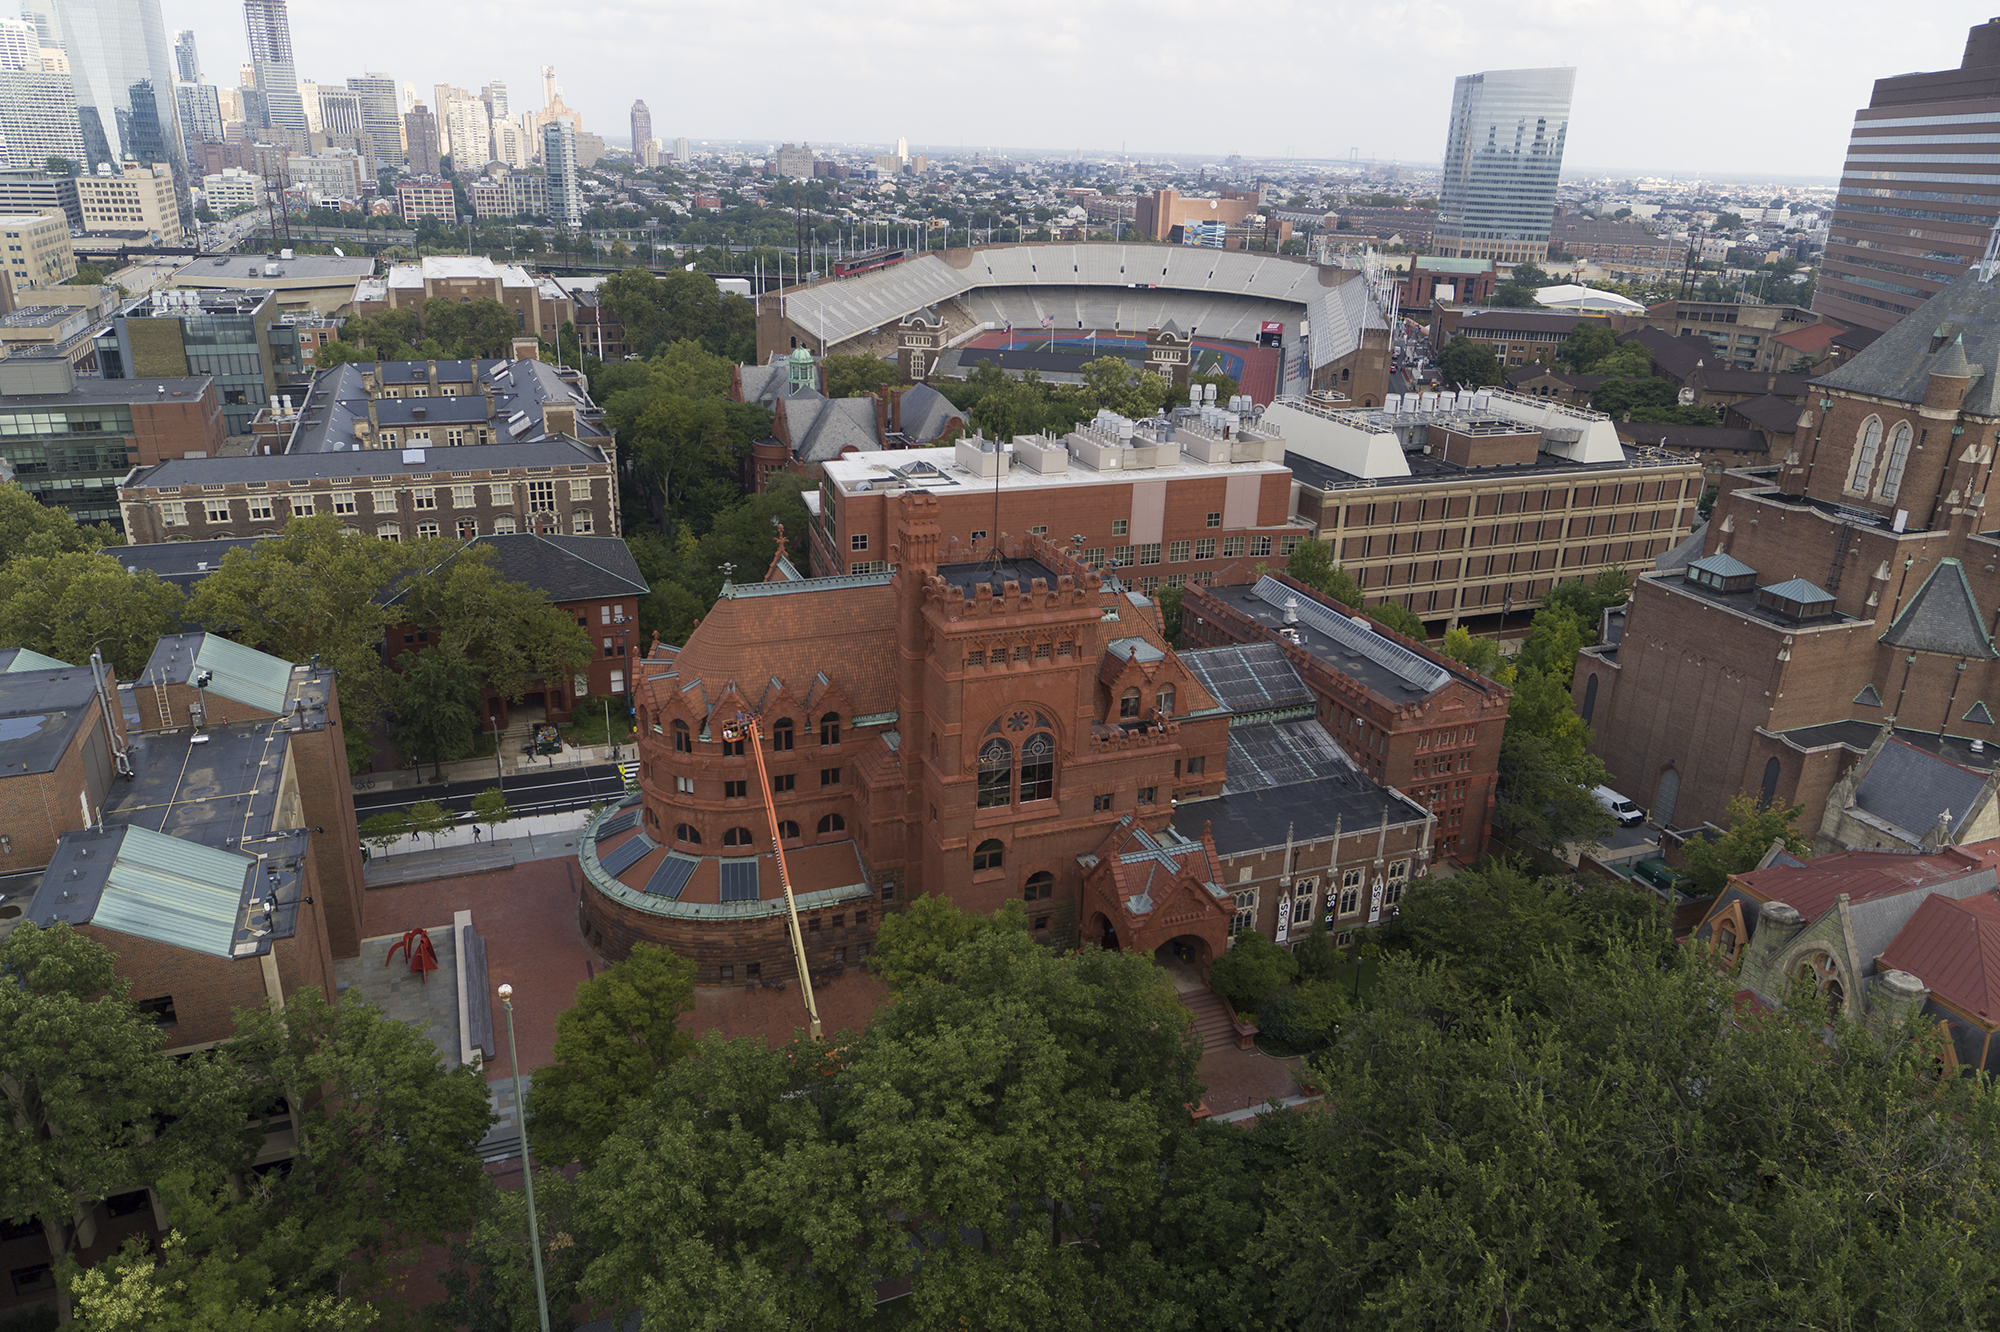 Aerial view of Fisher Fine Arts building, Franklin Field, and city of Philadelphia in the background.